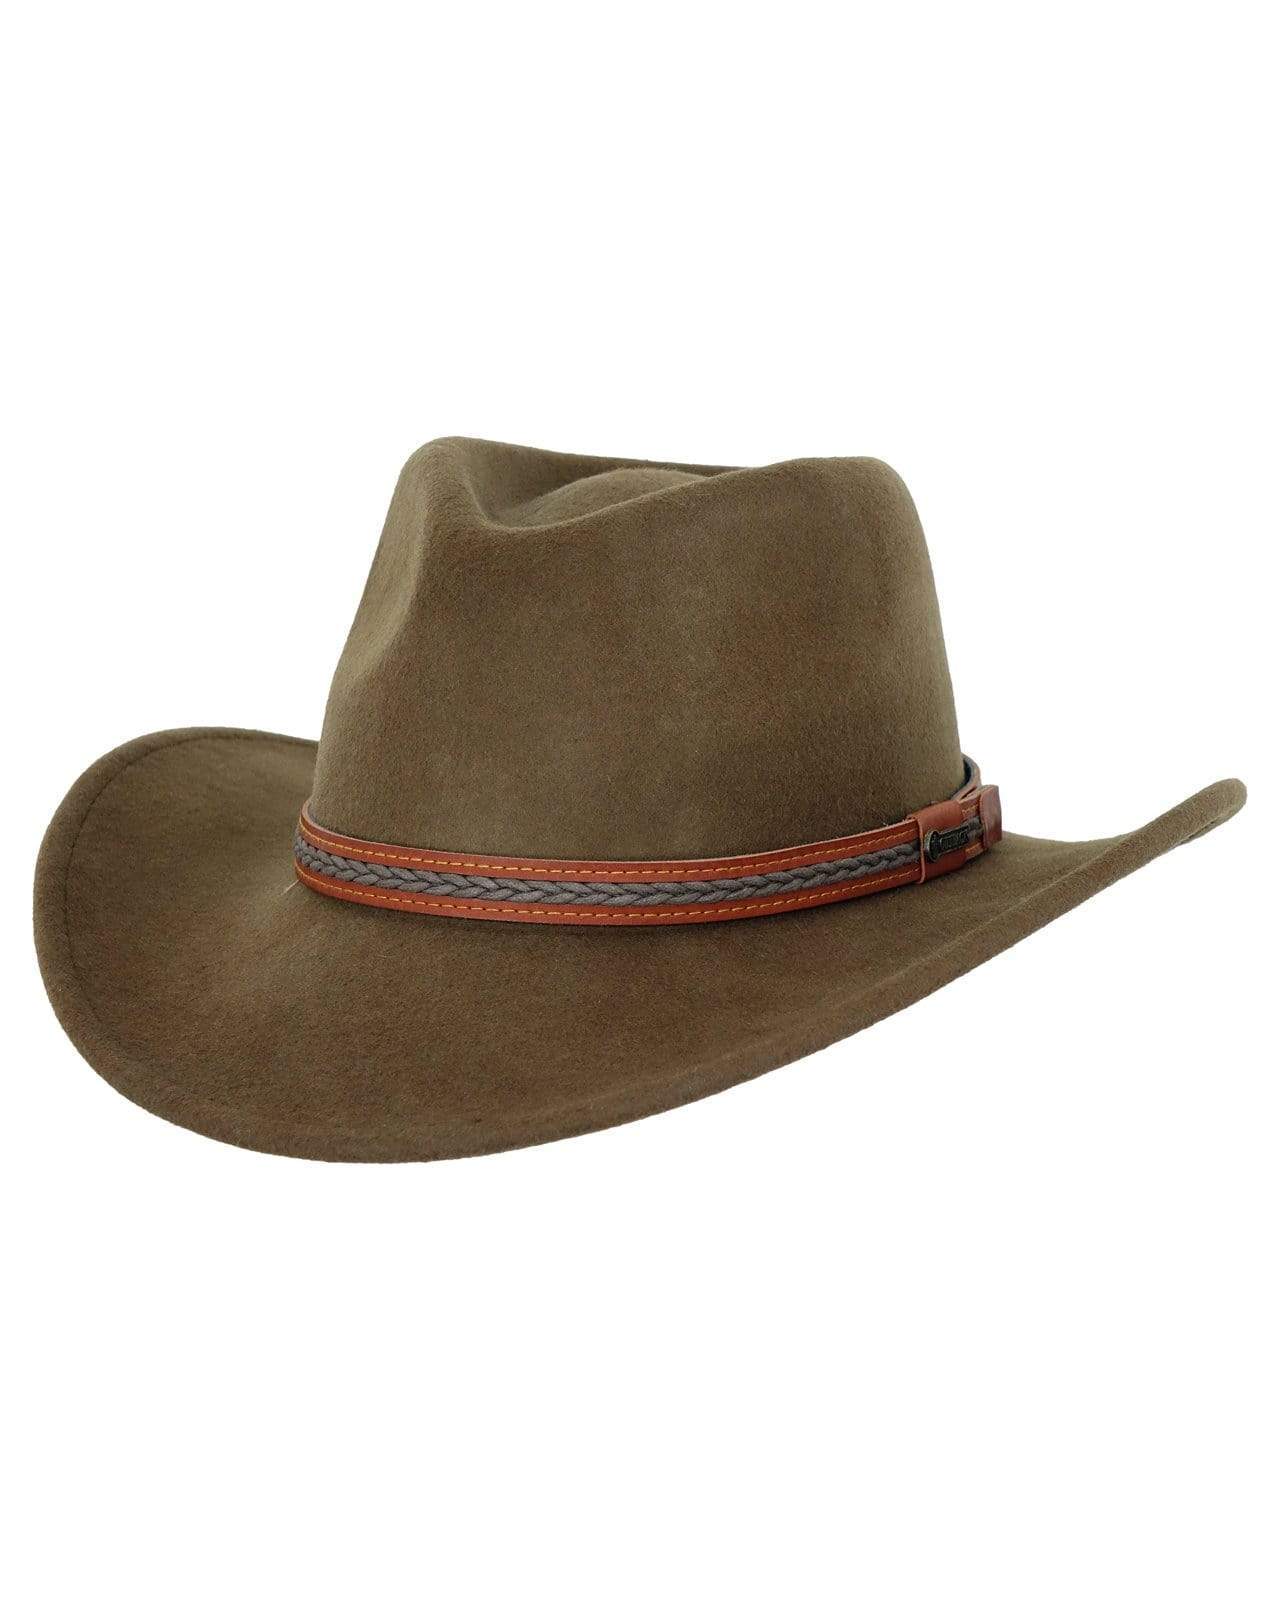 High Country | Wool Felt Hats by Outback Trading Company